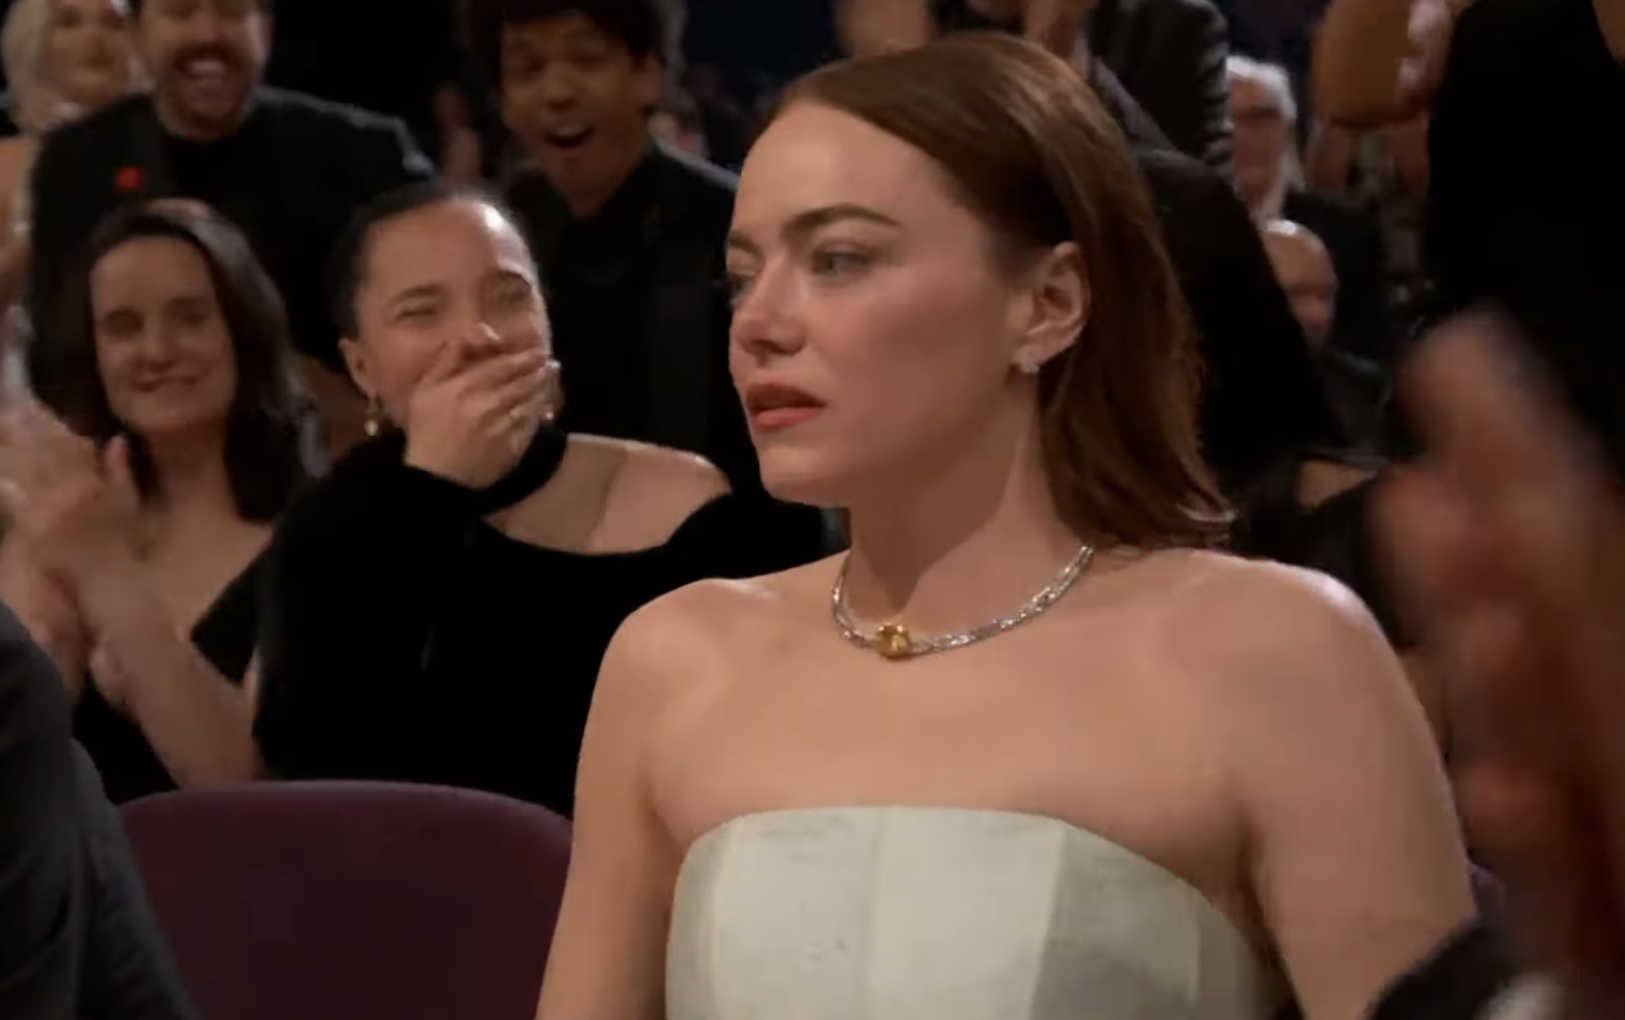 Emma Stone seated at the Oscars, reacting with a surprised expression